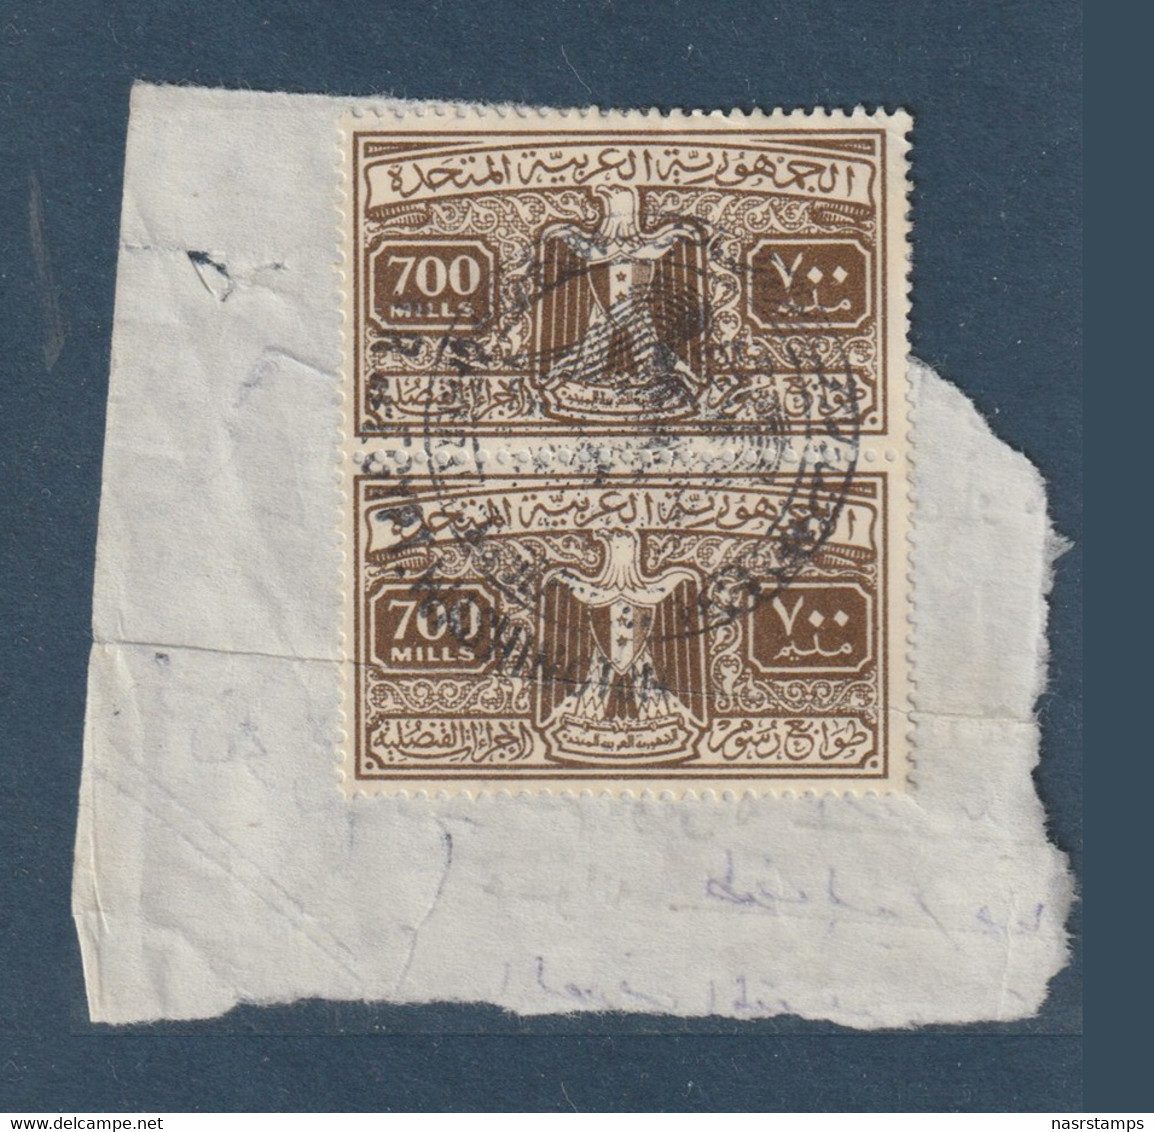 Egypt - 1959-70 - Rare Revenue - Consular - The Delightfully Long Eagle Issue - Used Stamps